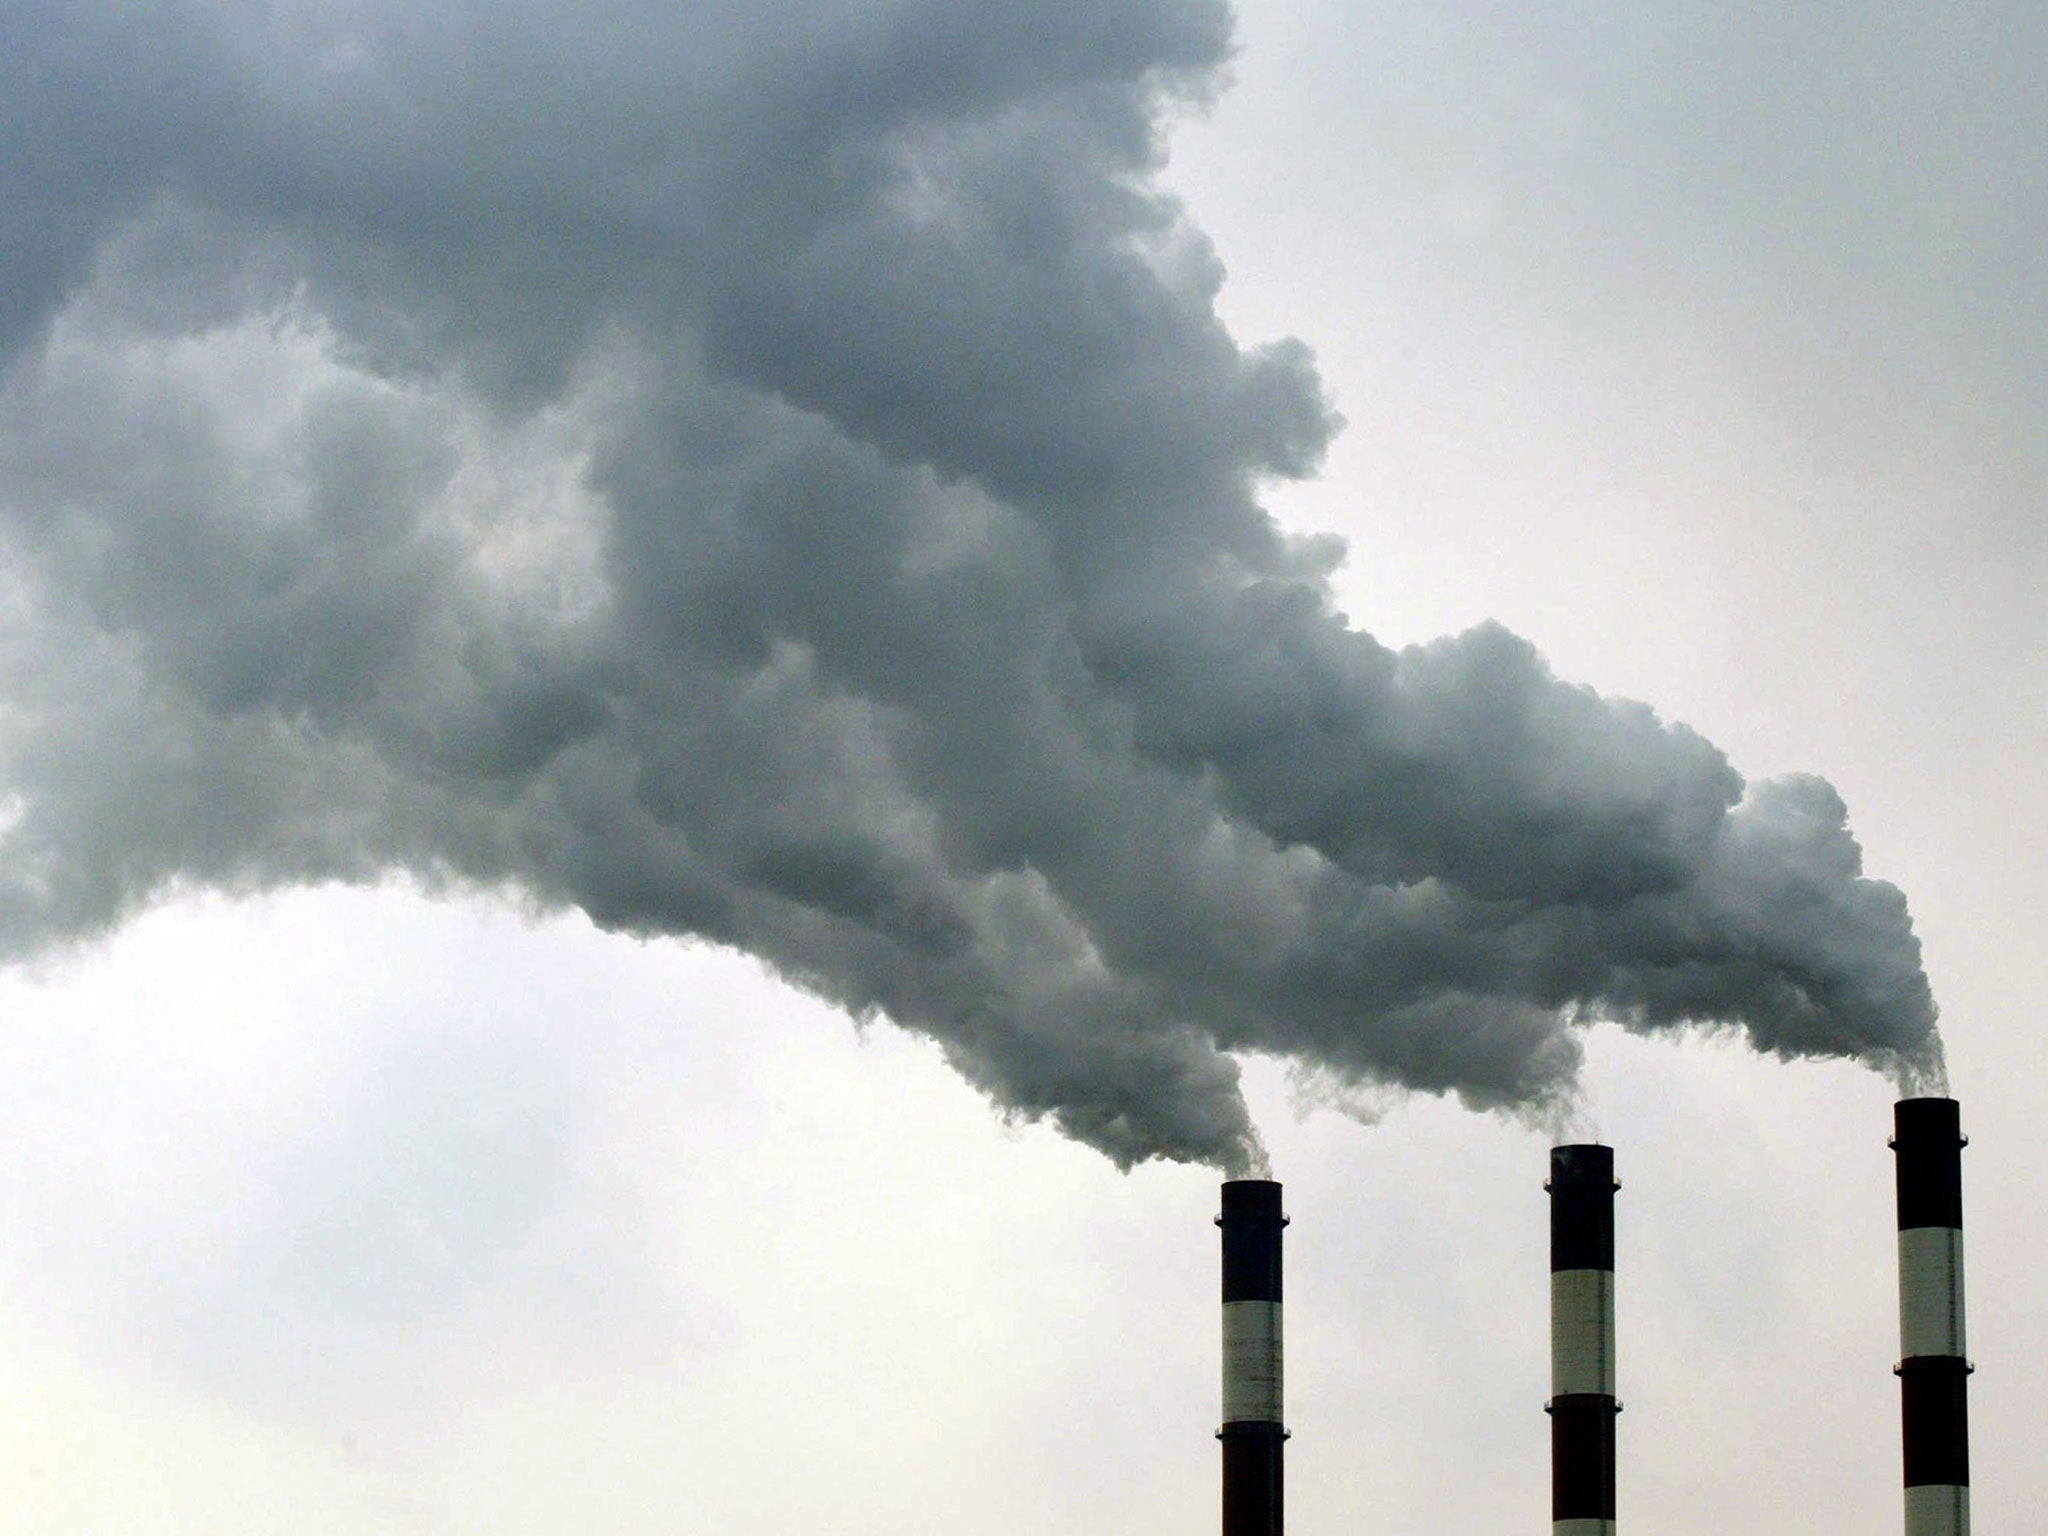 Fossil fuel emissions are the main driver of climate change and potentially deadly smog